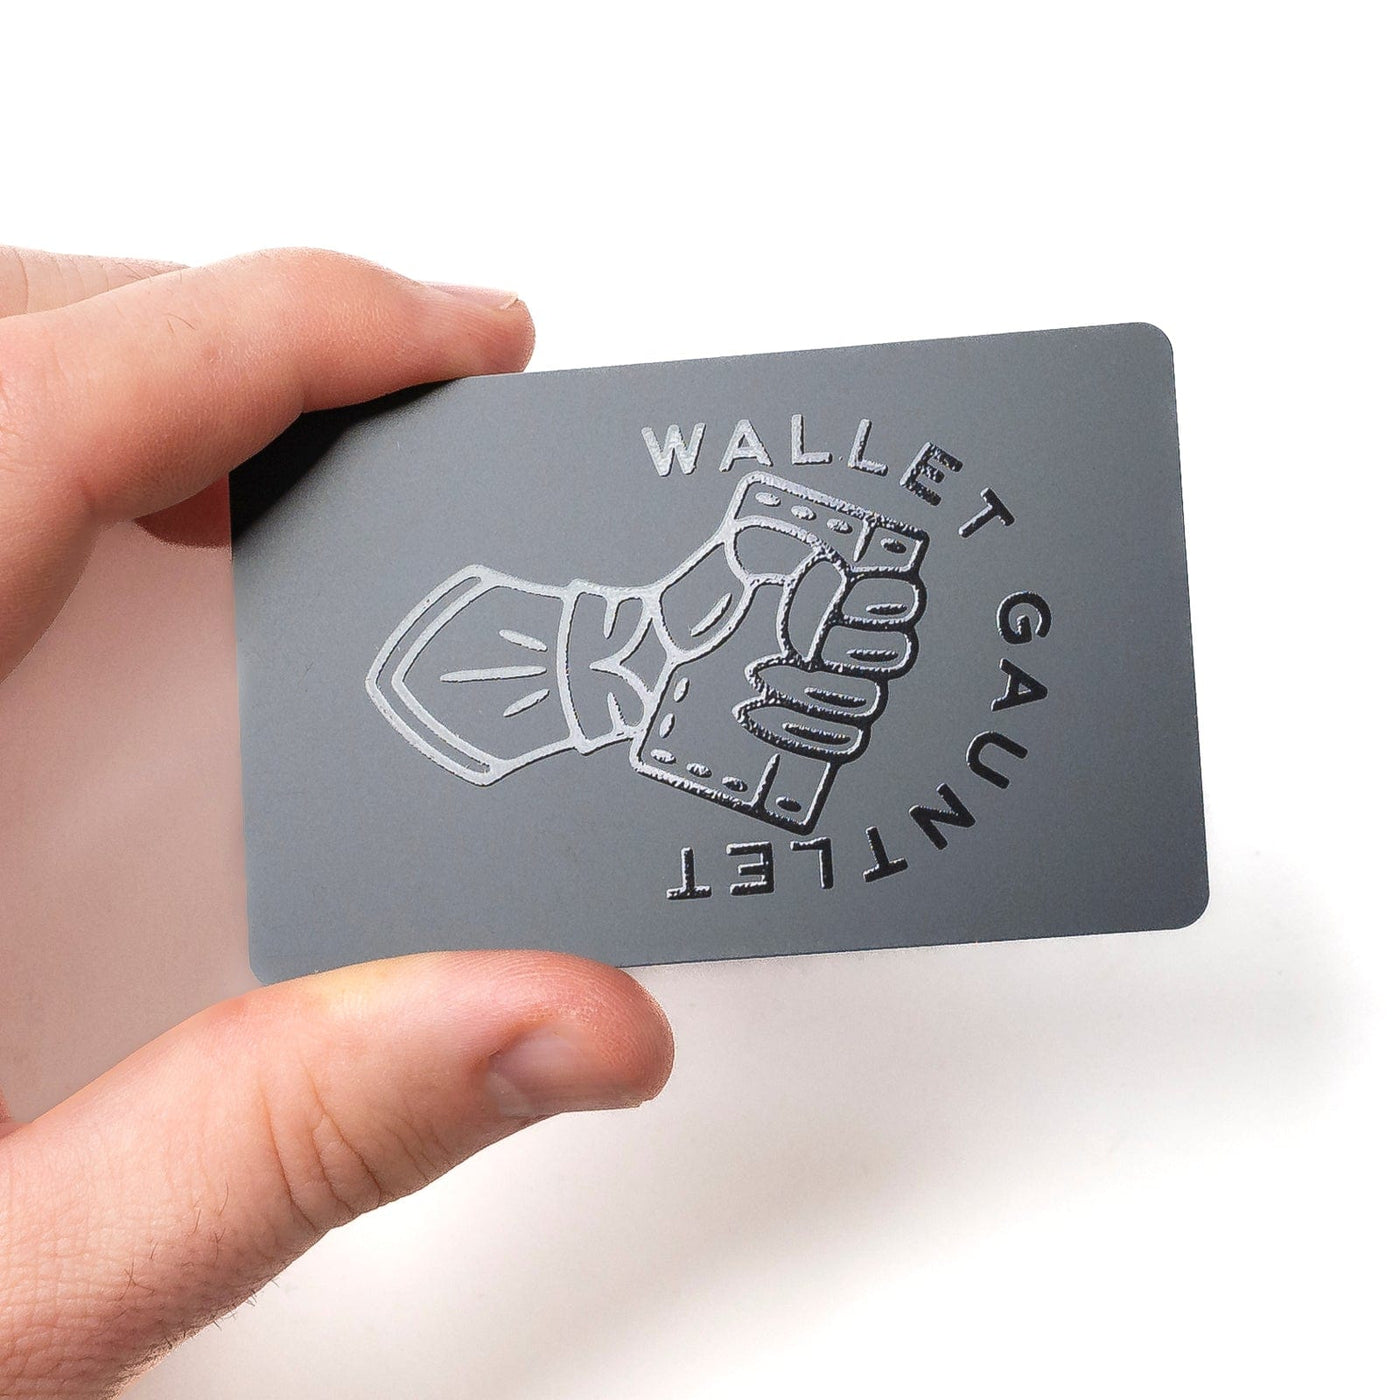 RFID Blocking Card: Constant, Hassle-free Credit Card Security